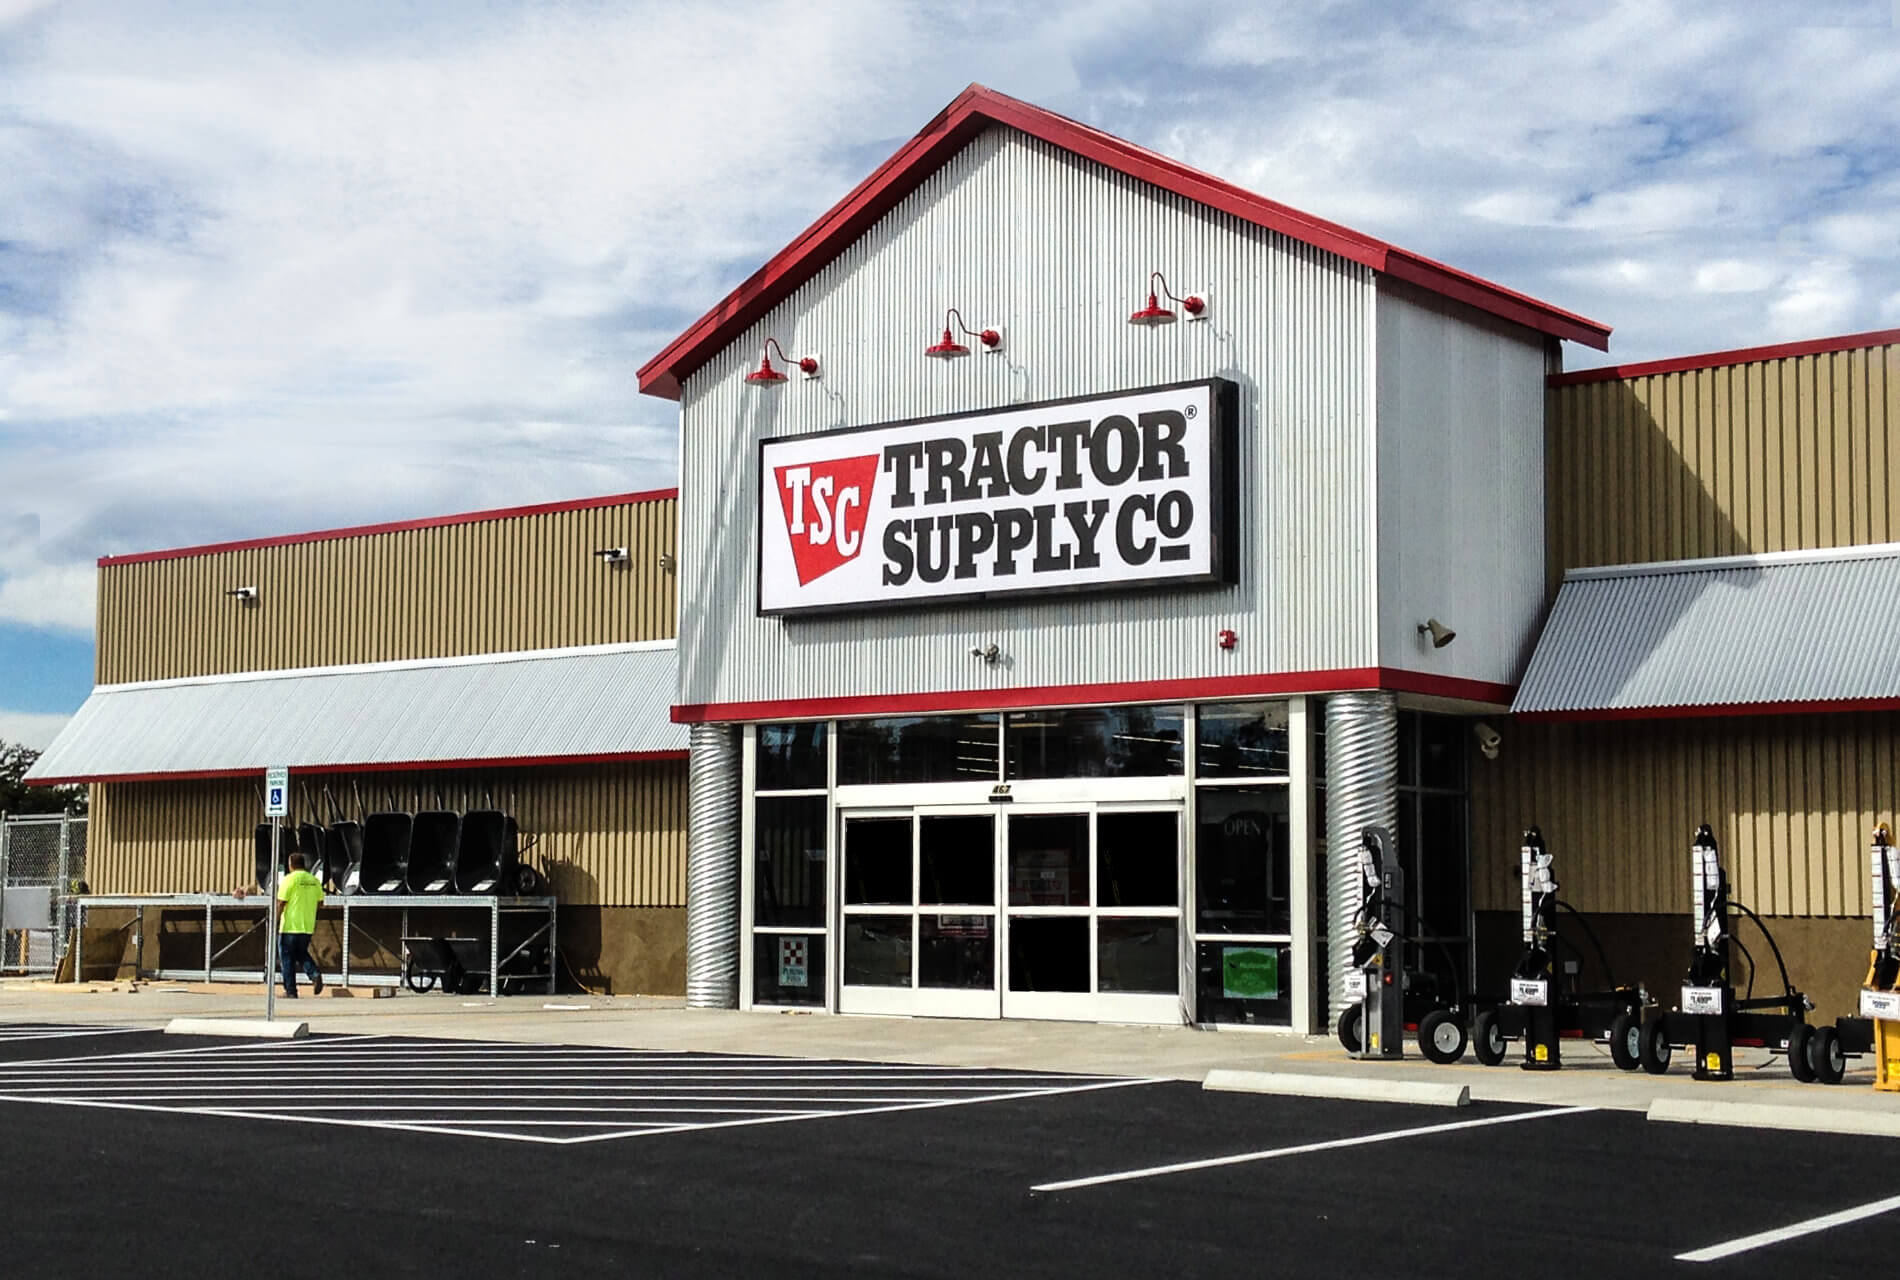 Industrial Building with 'Tractor Supply Co' Logo in the center